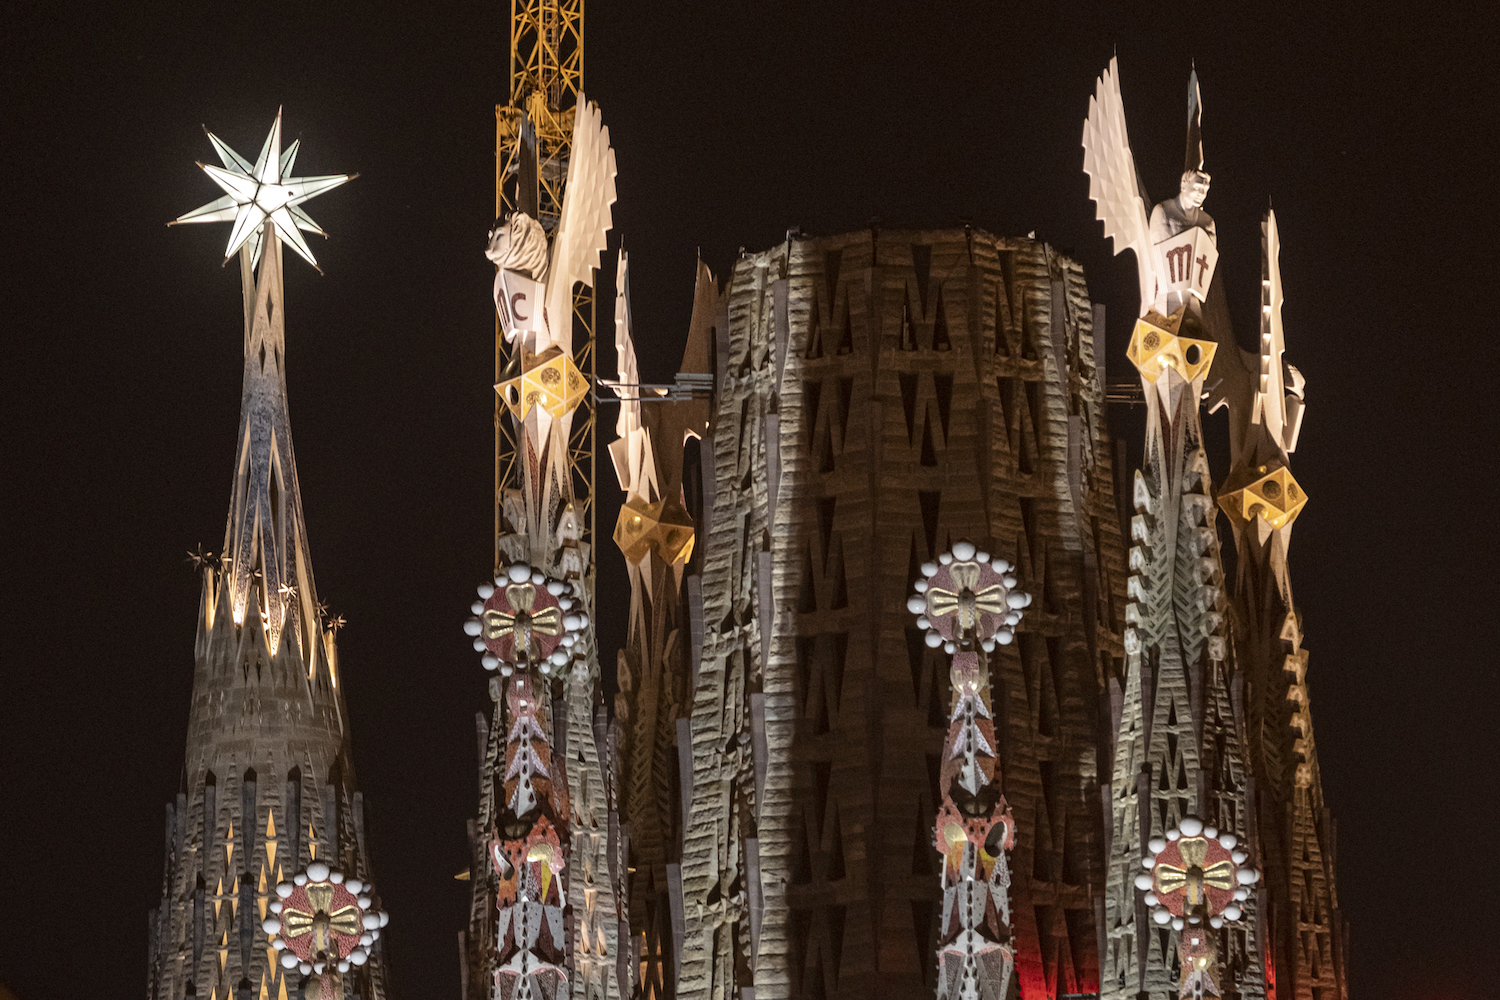 Illumination of the towers of the Evangelists and the Virgin Mary